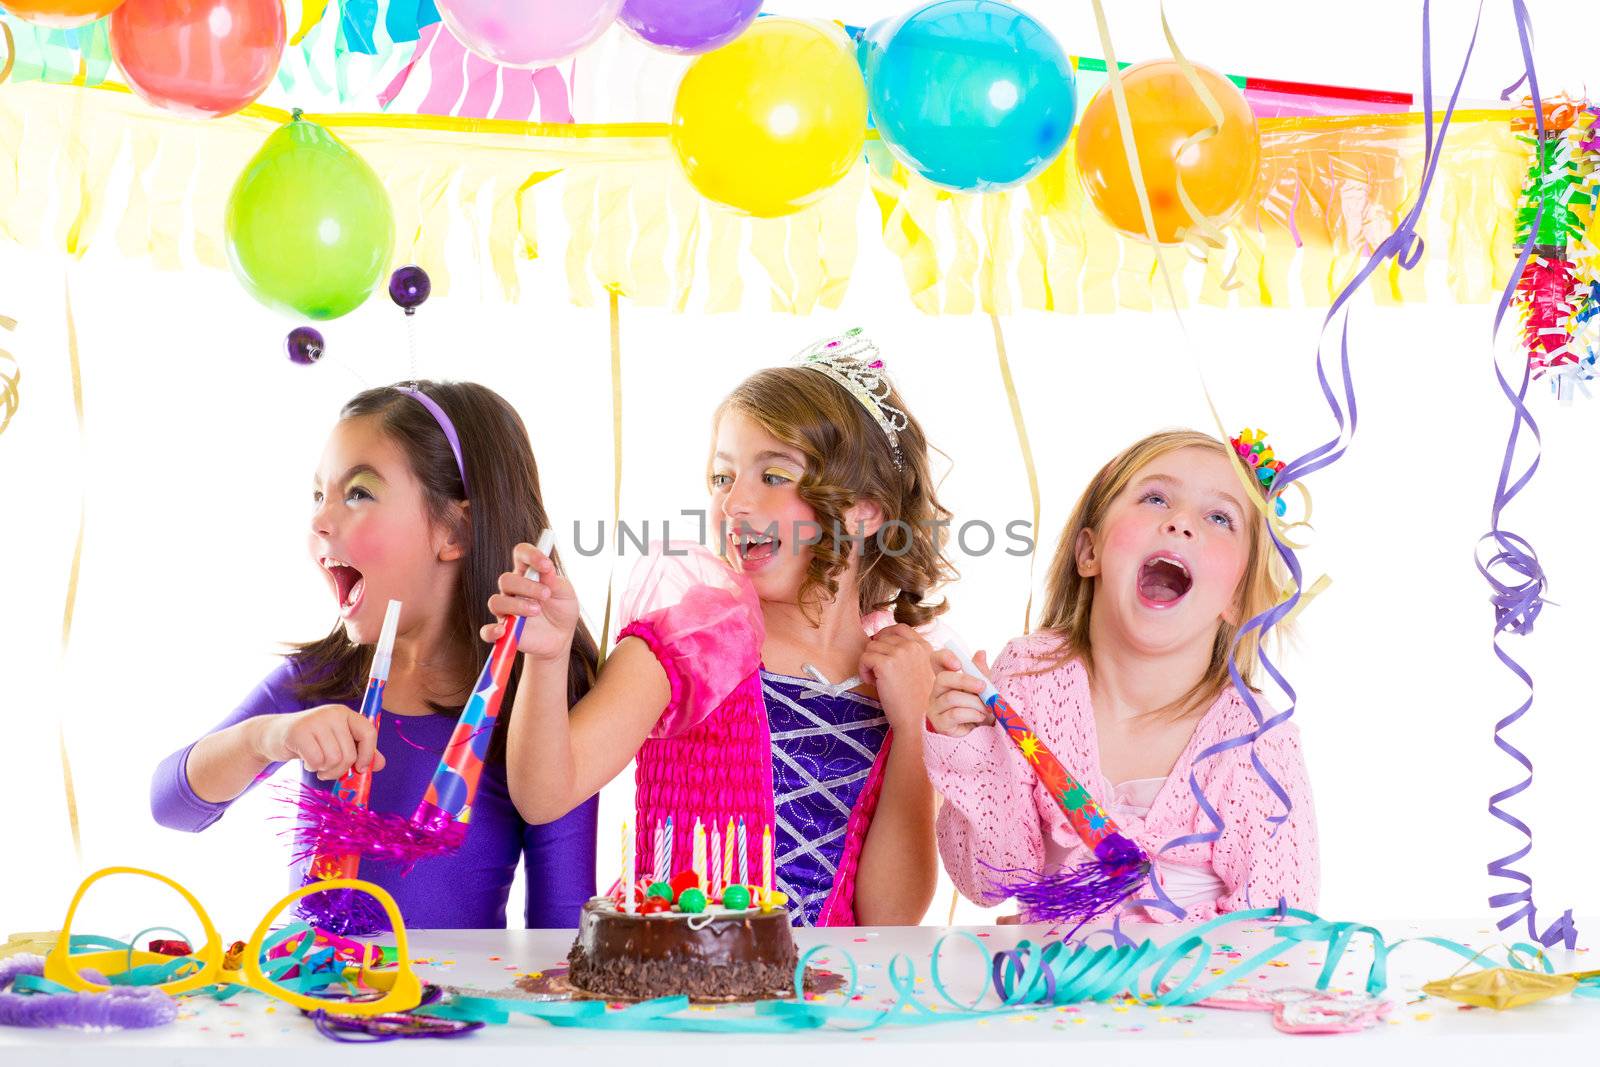 children kid in birthday party dancing happy laughing with baloons serpentine and garlands